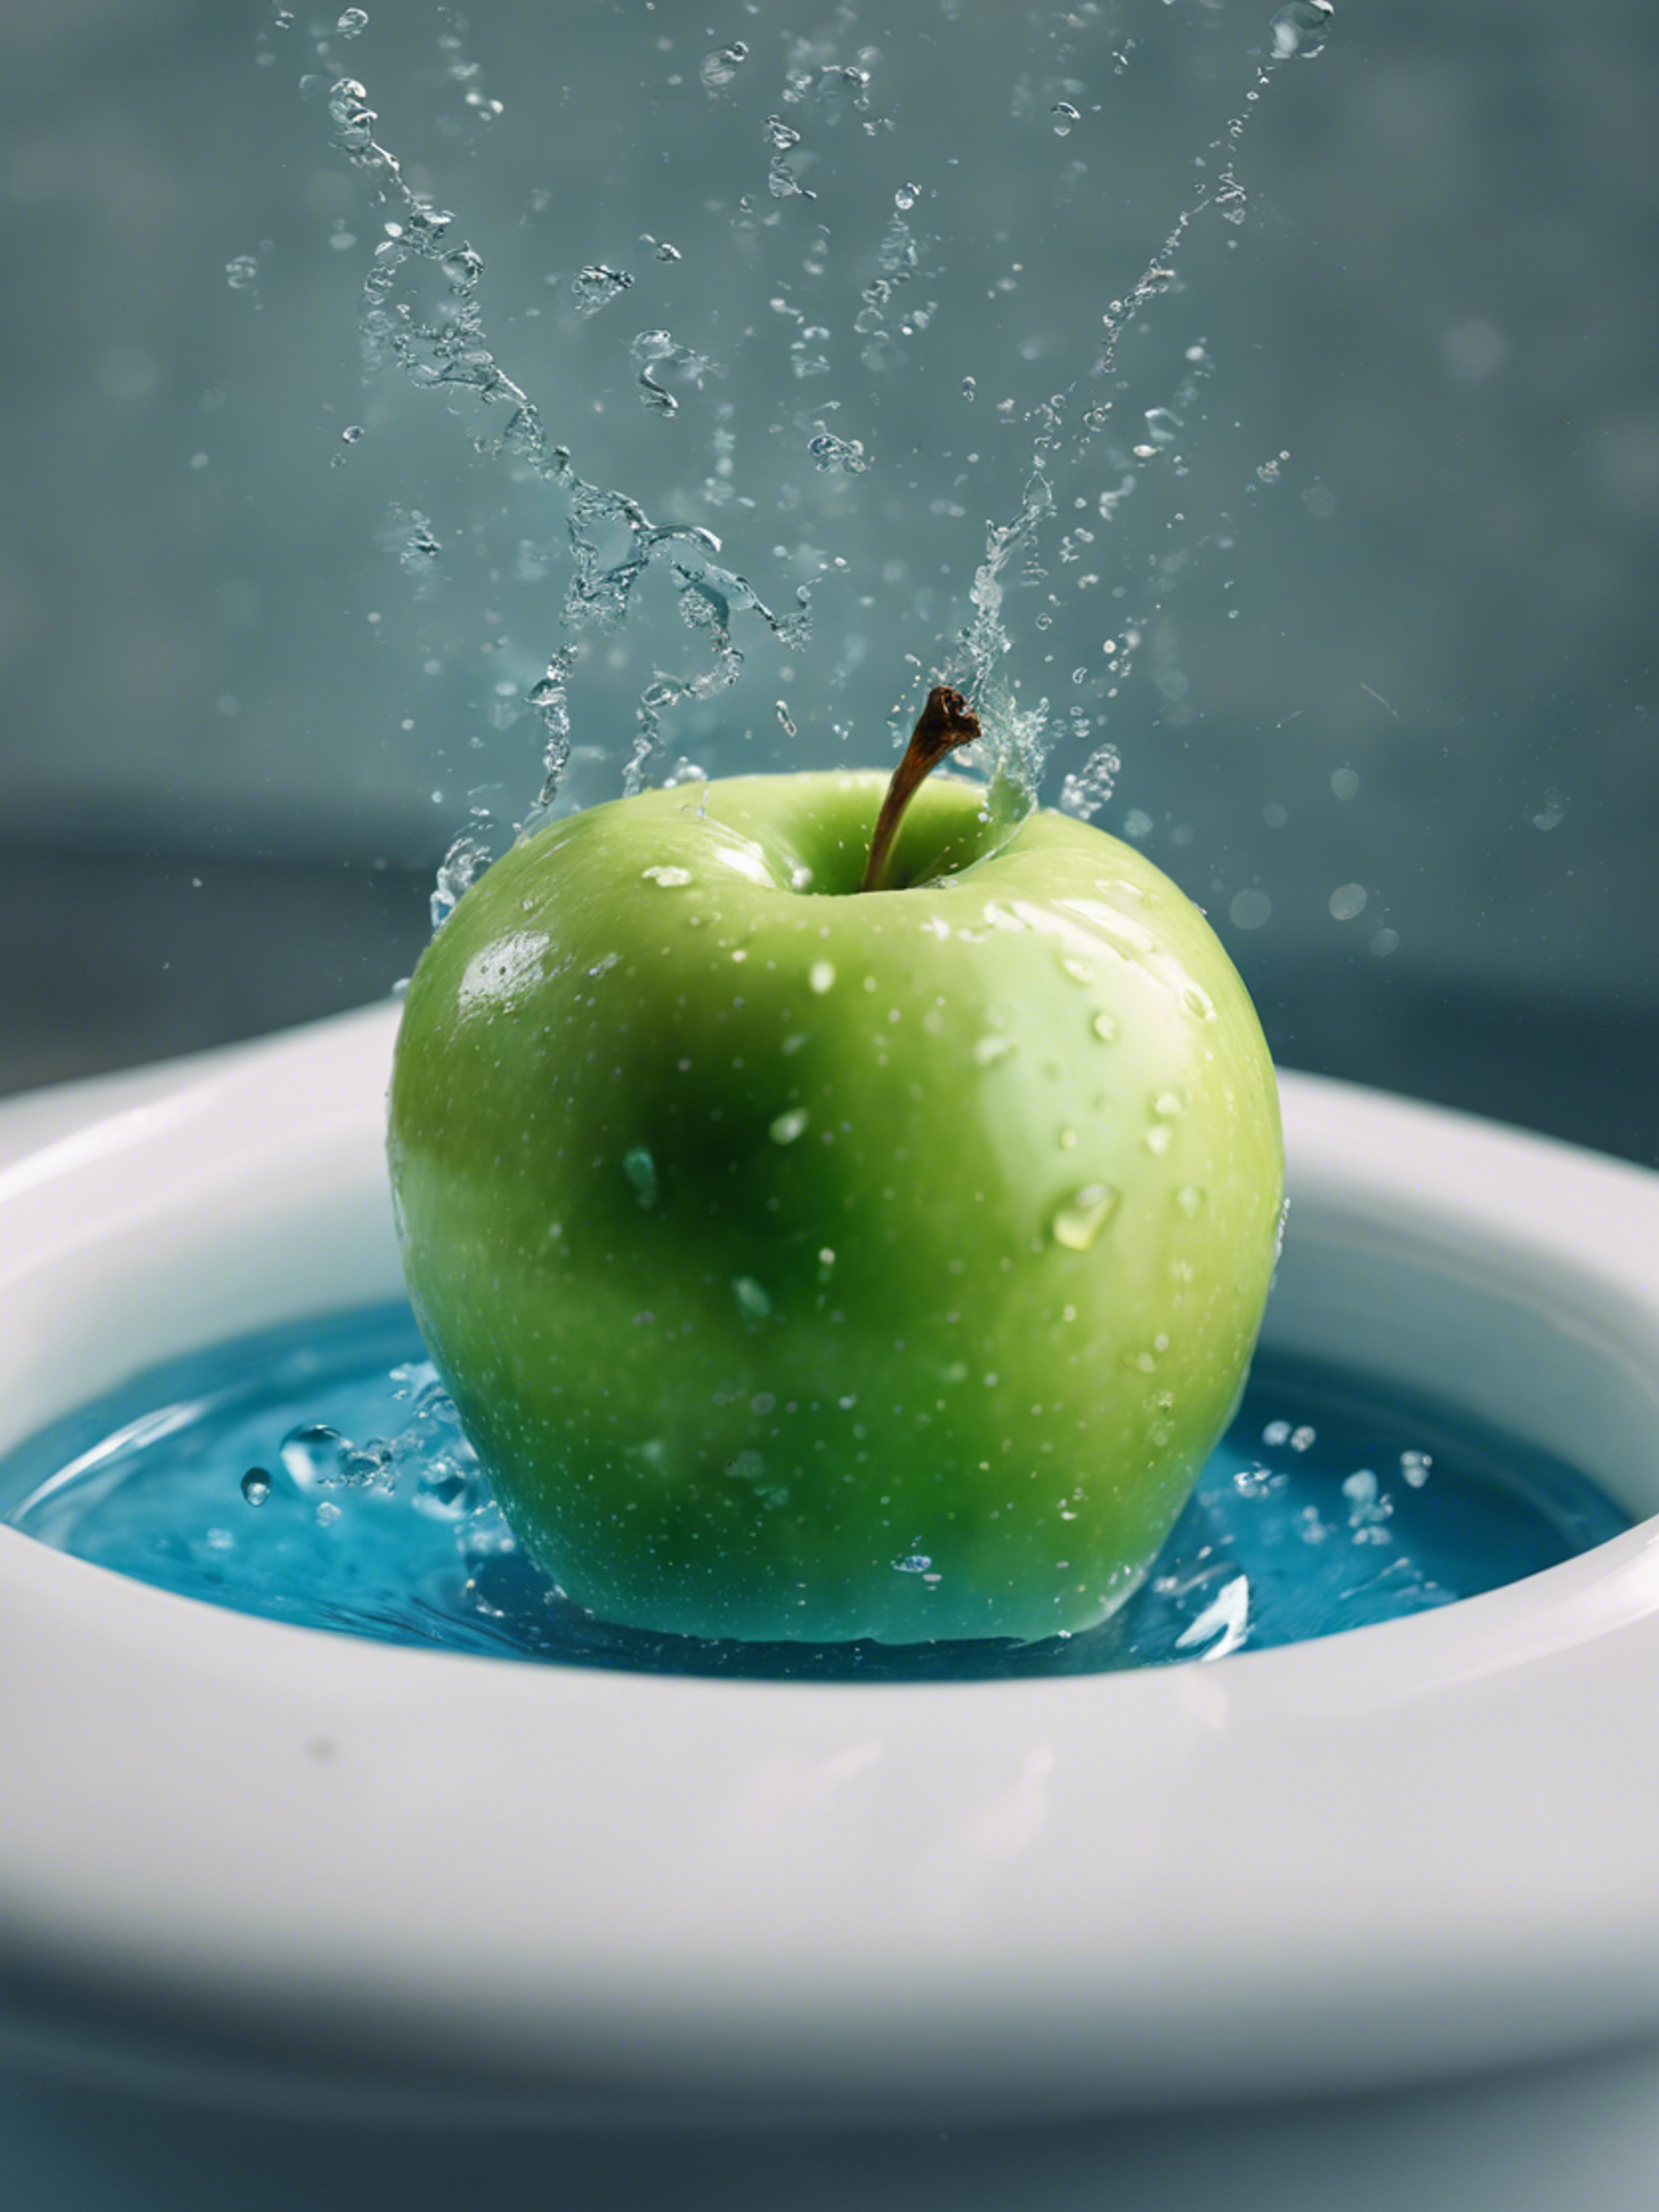 A green apple falling into a basin filled with azure blue water. 벽지[a9bb5407cd4a4f929343]